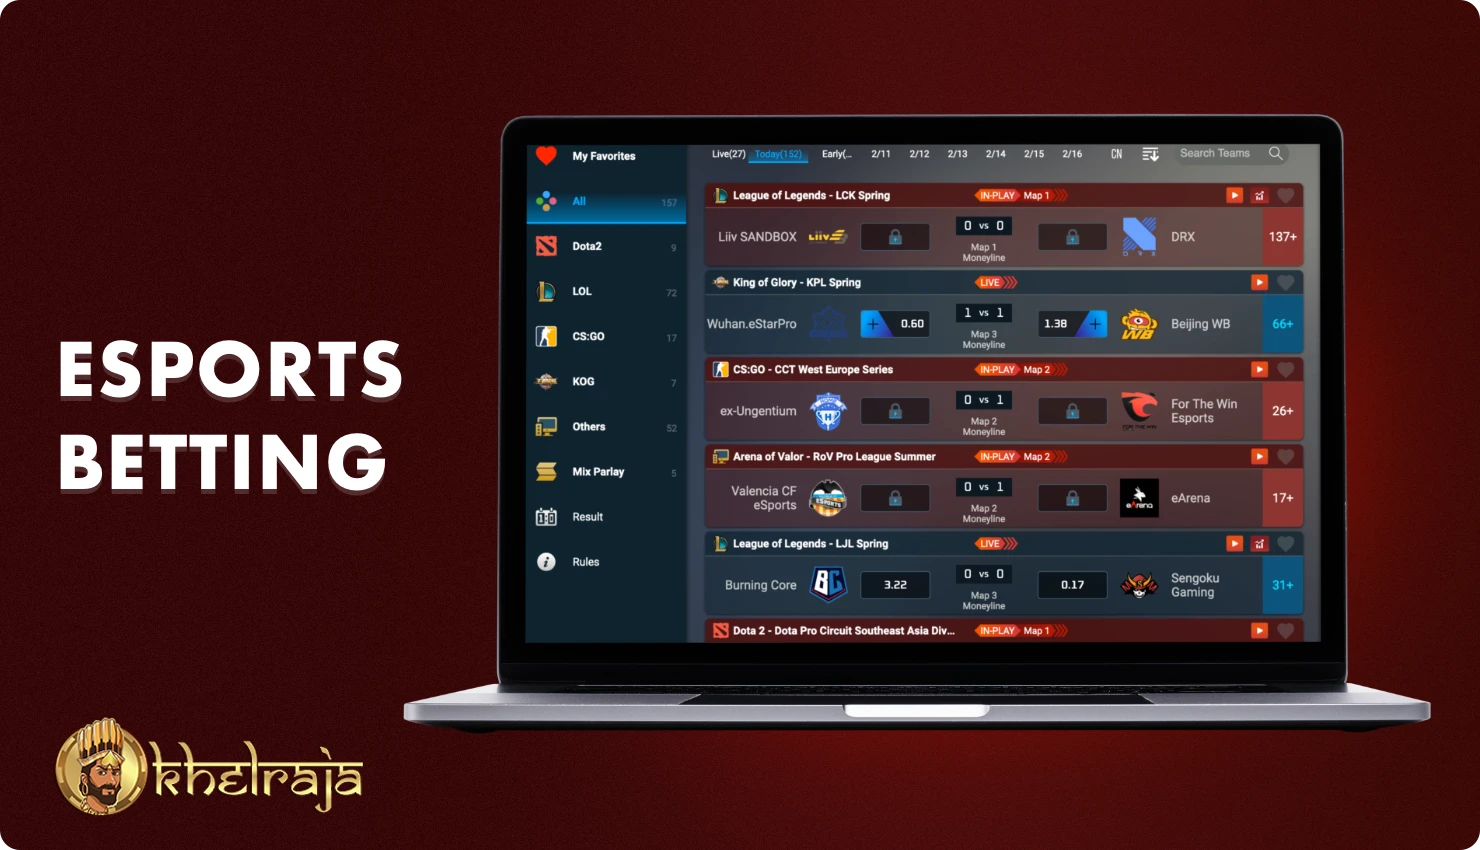 On the Khelraja platform, various types of eSports betting are available to Indian users